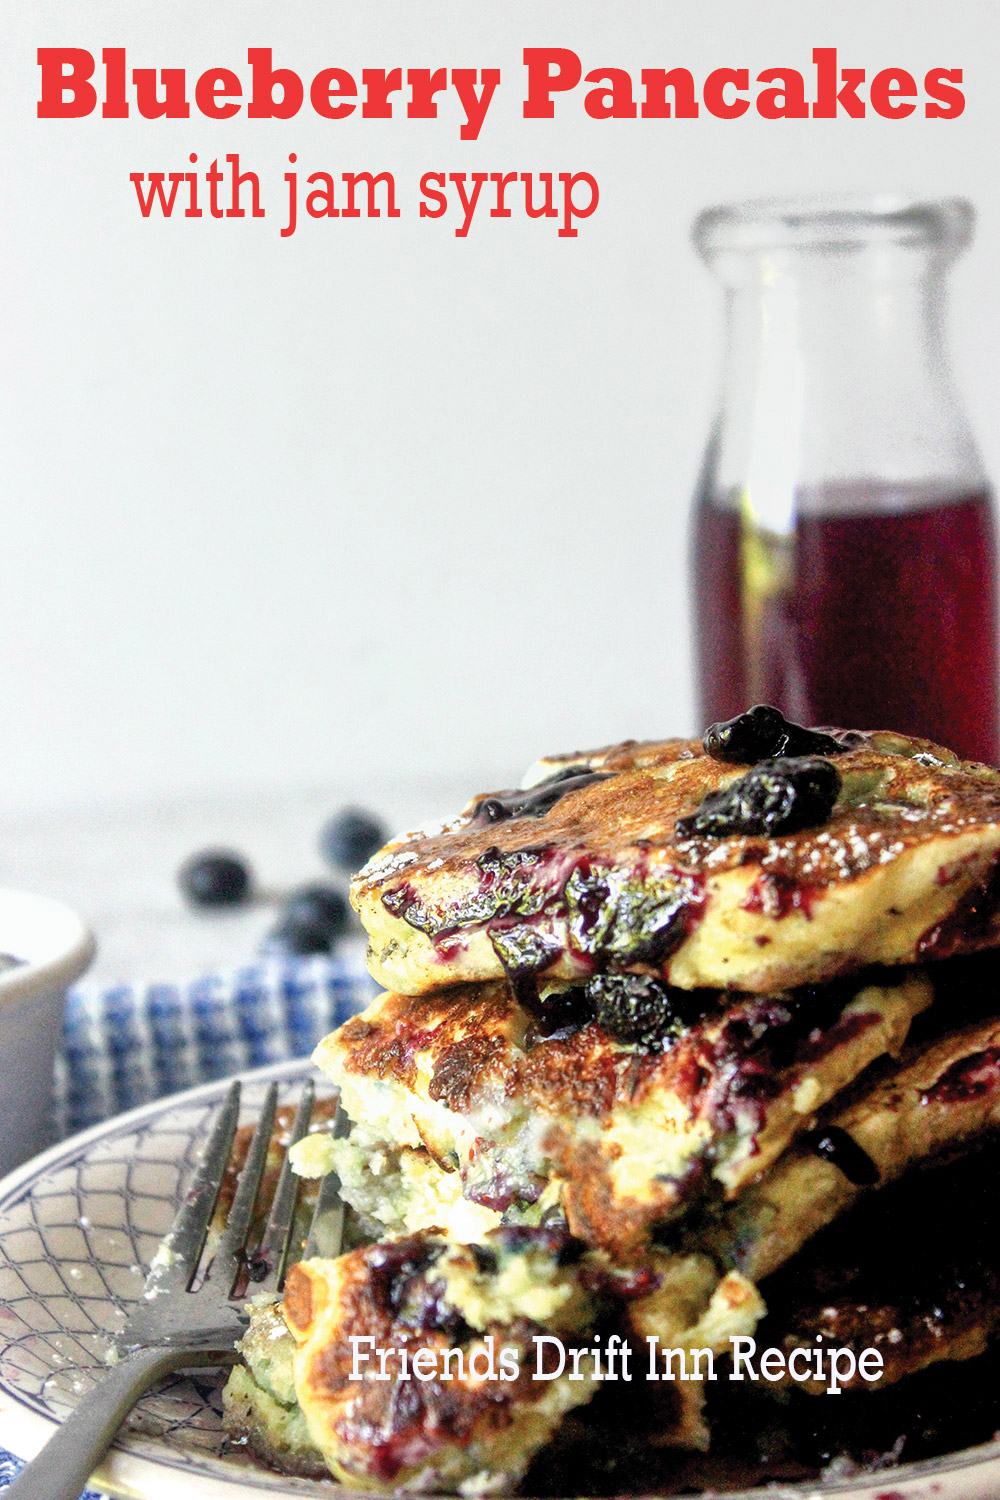 Blueberry buttermilk pancakes with blueberry jam syrup